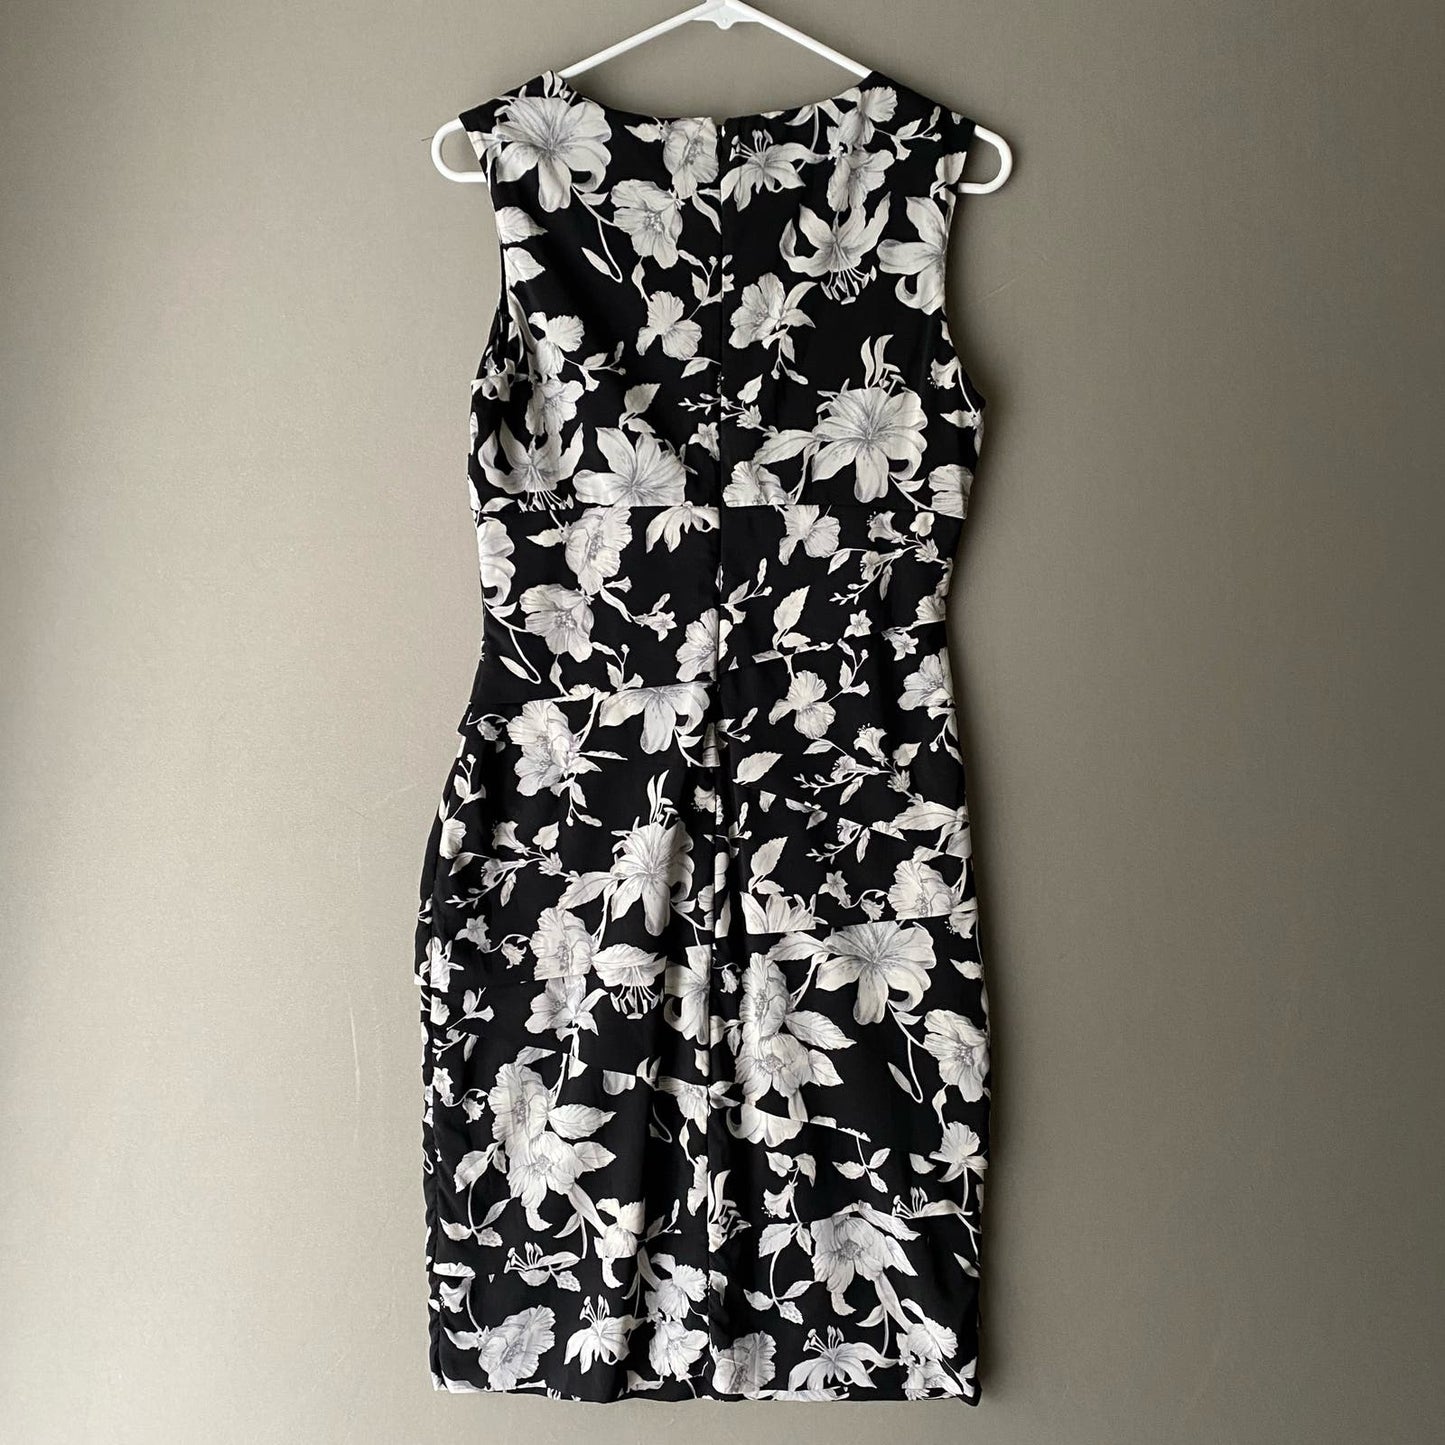 WHBM instantly slimming sz 6 floral sweetheart spring floral sheath dress